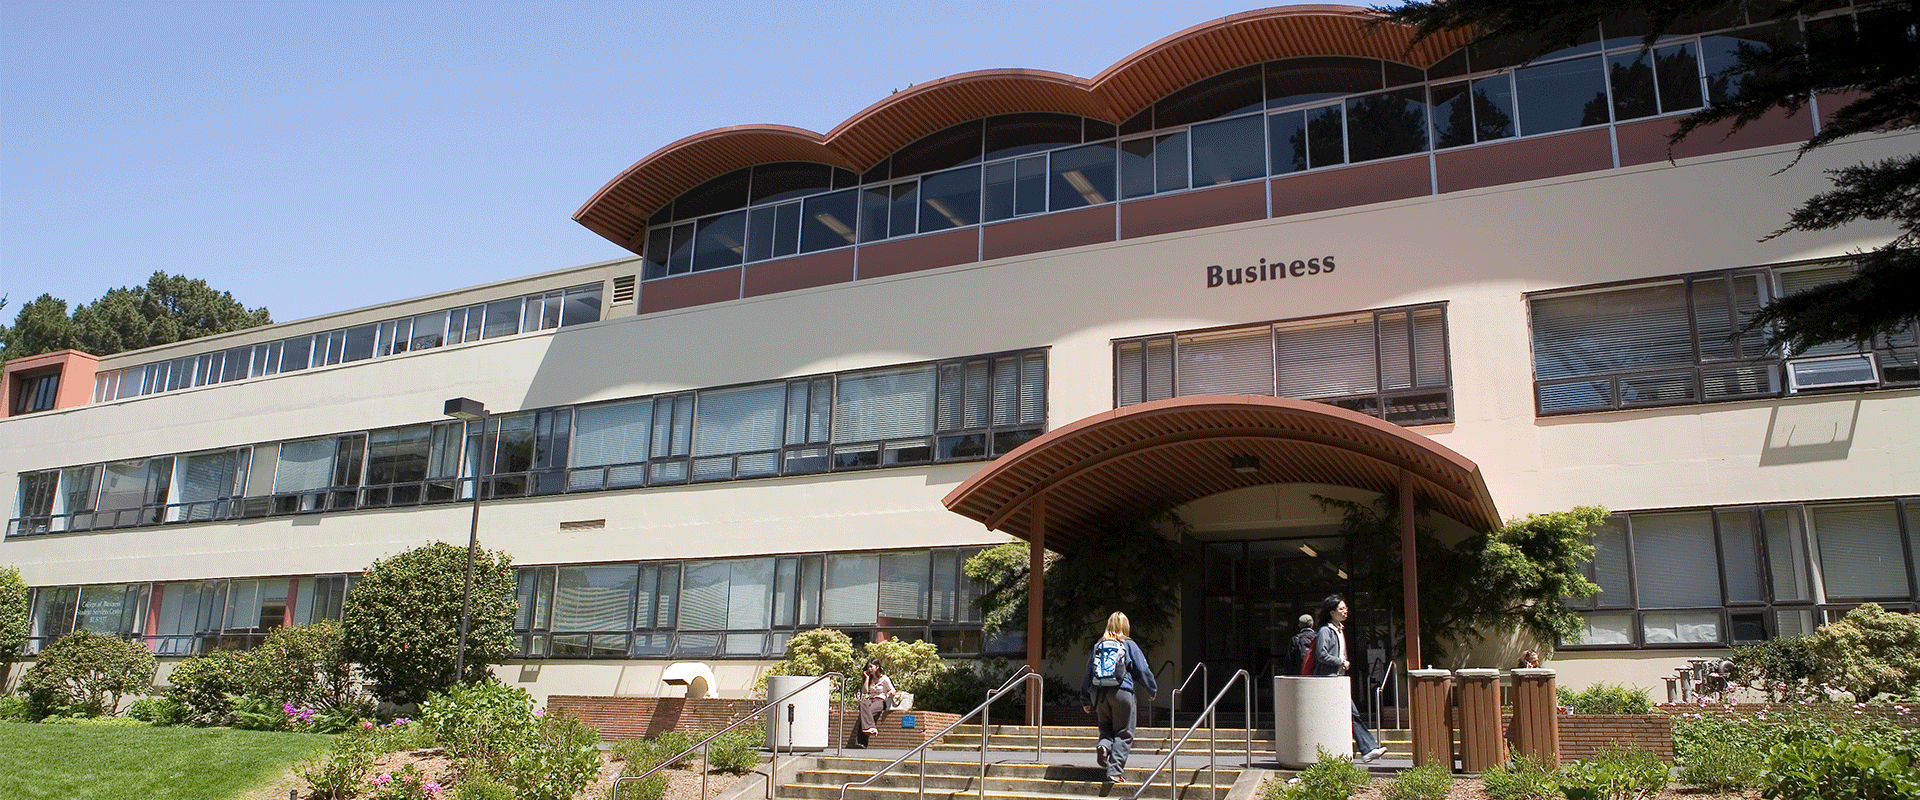 SF State Business Building